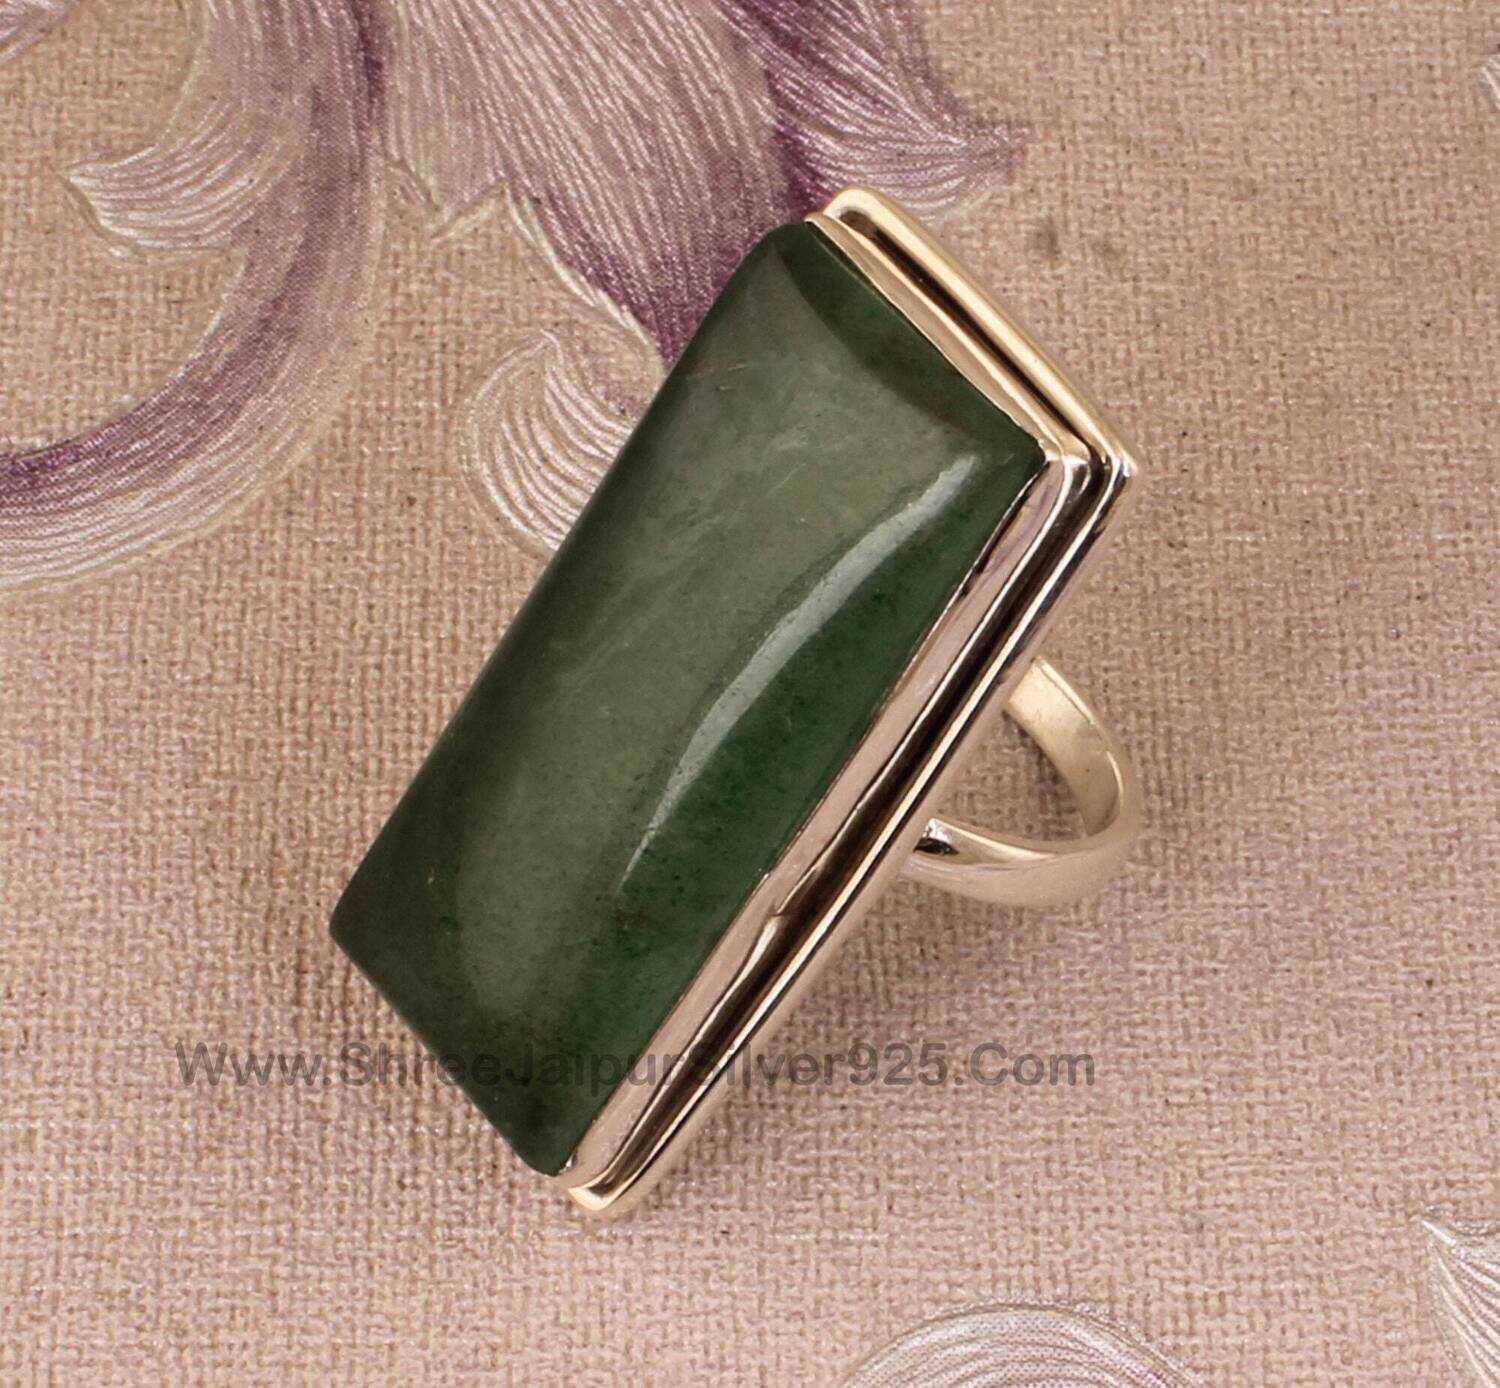 Green Cherry Quartz Solid 925 Sterling Silver Ring For Women, Handmade Rectangle Bar Stone Band Ring For Wedding Anniversary Gift For Her